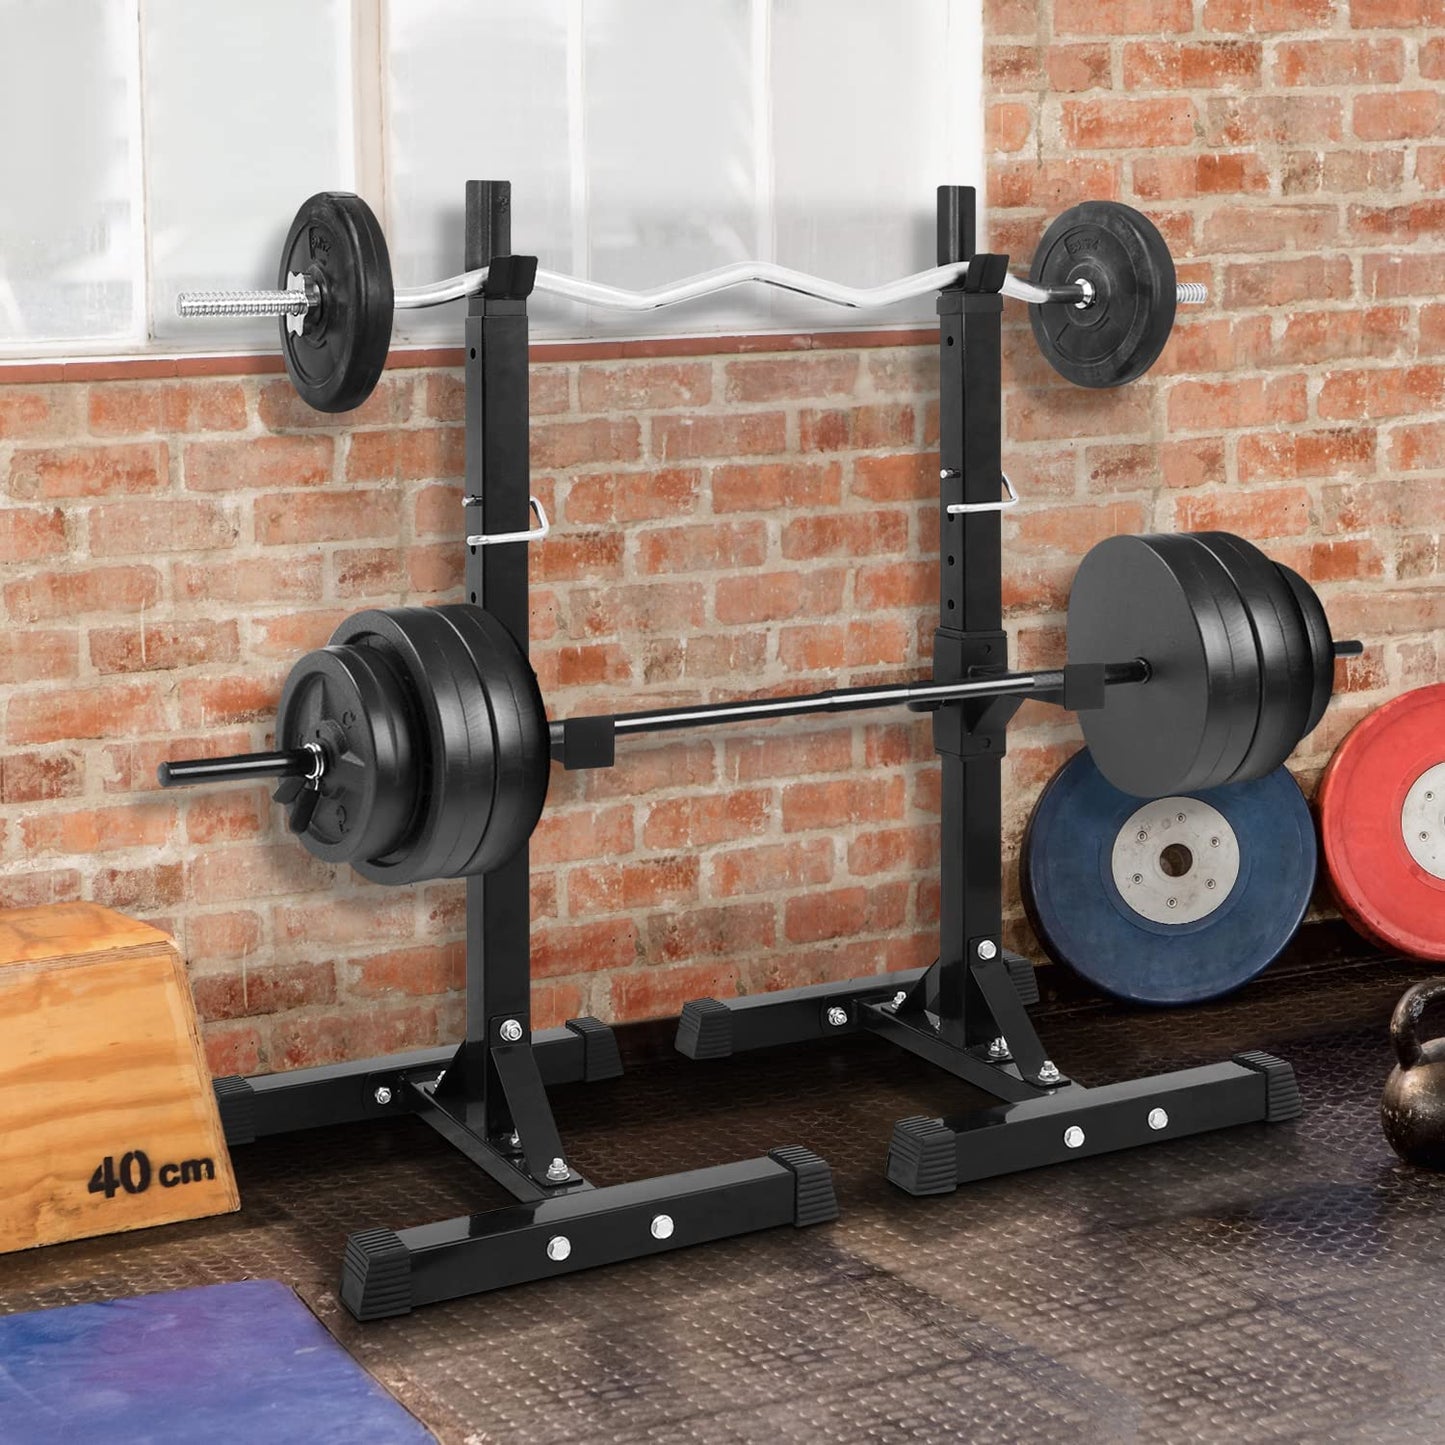 Adjustable Squat Rack Multi-Function Barbell Rack Squat Stand, Dumbble Rack, Weight Lifting Bench Press Dip Station 550lb Capacity Home Gym Equipment